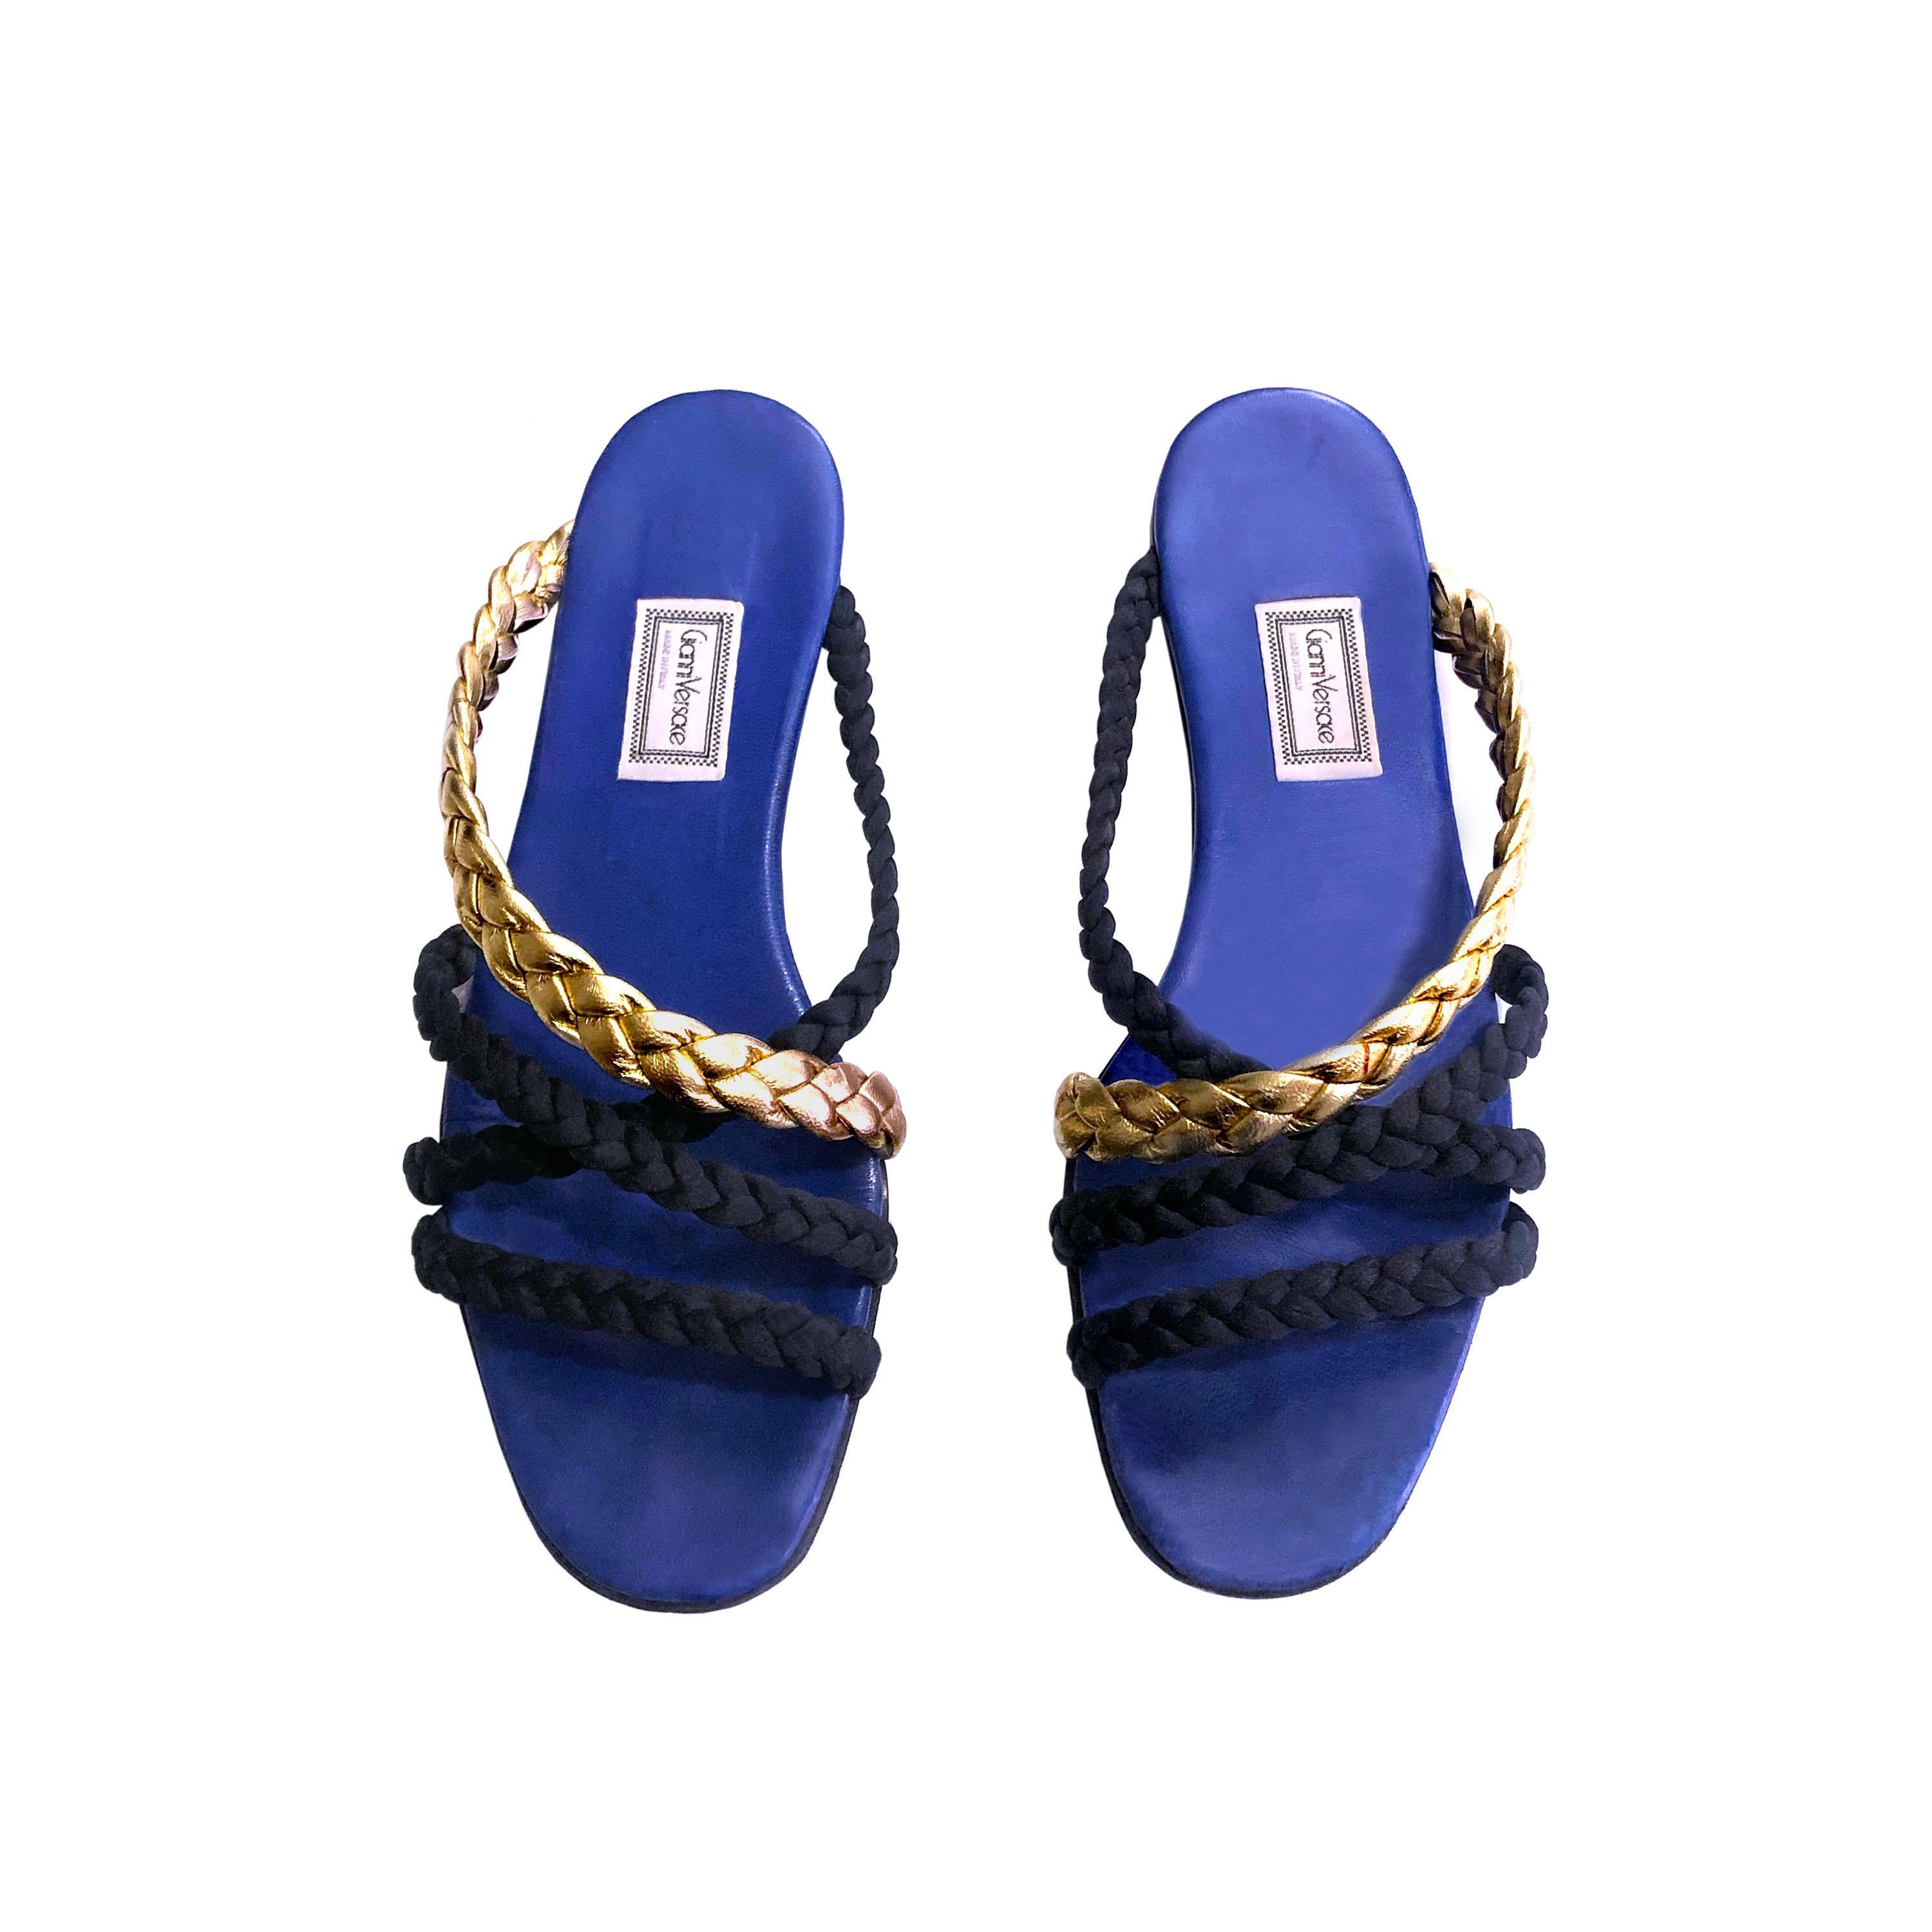 Gianni Versace Sandals - 1980s Vintage - Gold Leather Plaited Straps - EU 37.5 In Good Condition For Sale In KENT, GB